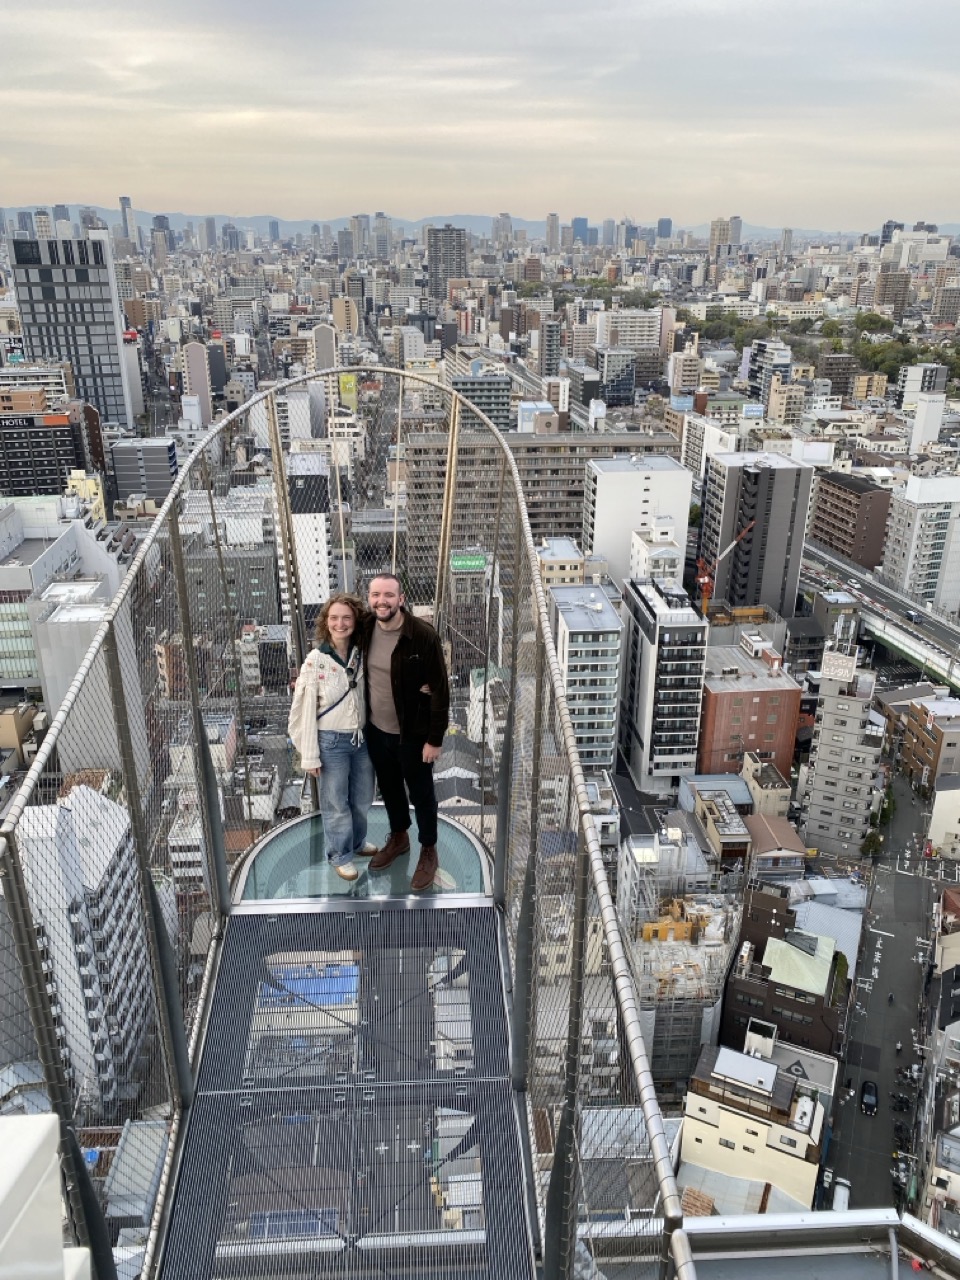 Me and Lucy at the top of the tower with a view of the city behind us